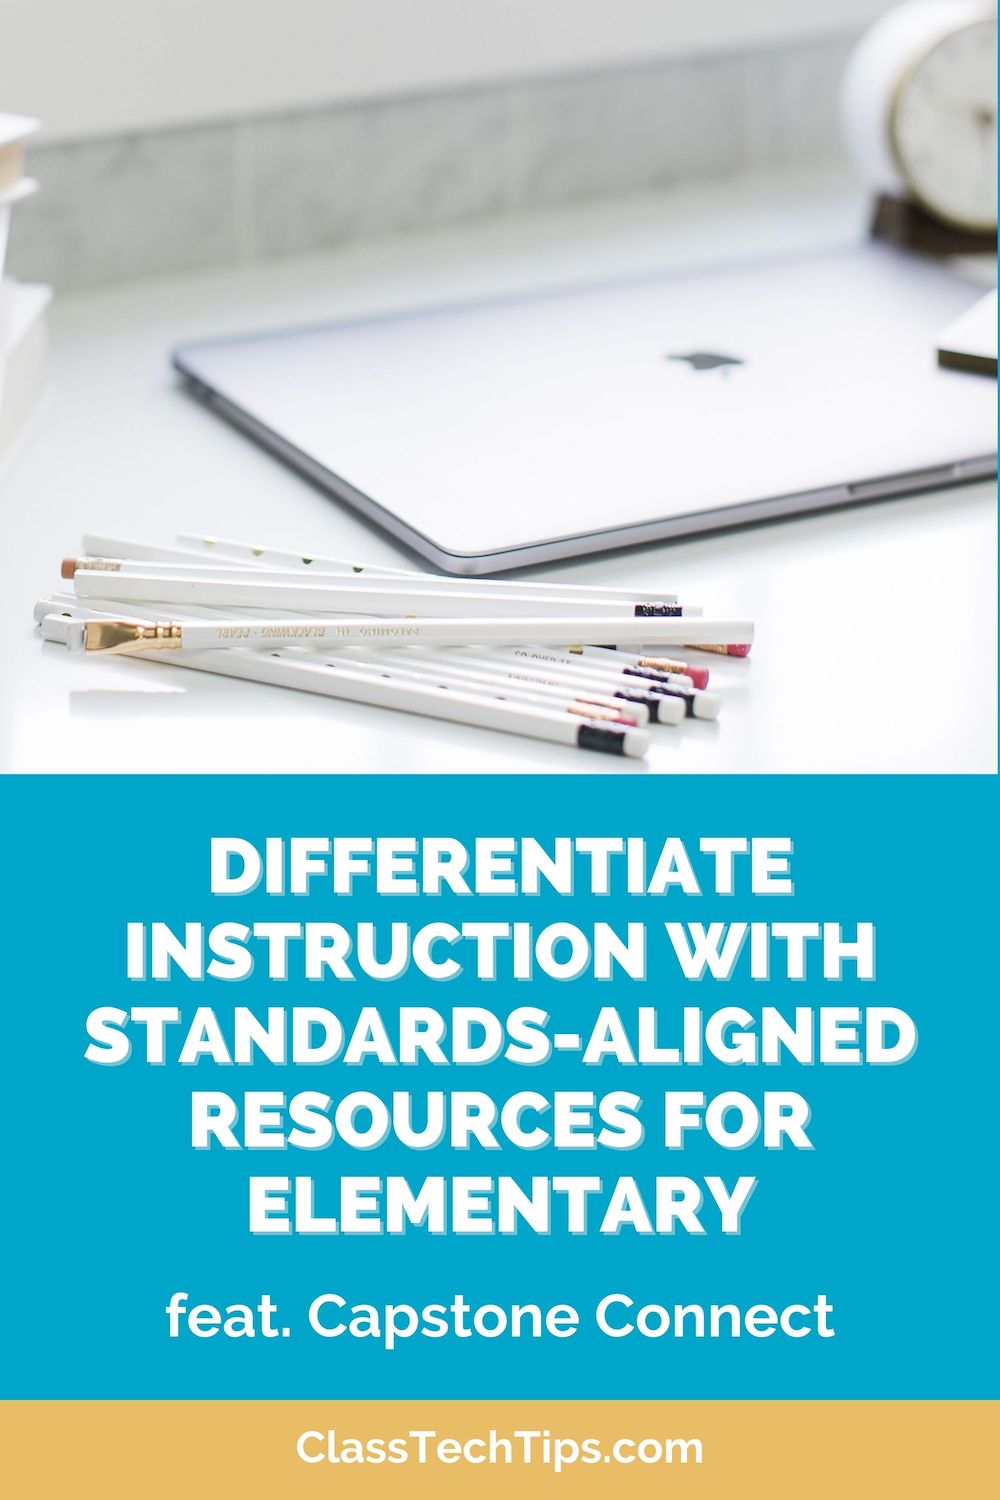 Where can you go to find engaging, standards-aligned resources? Connect has you covered if you're teaching elementary school this year.